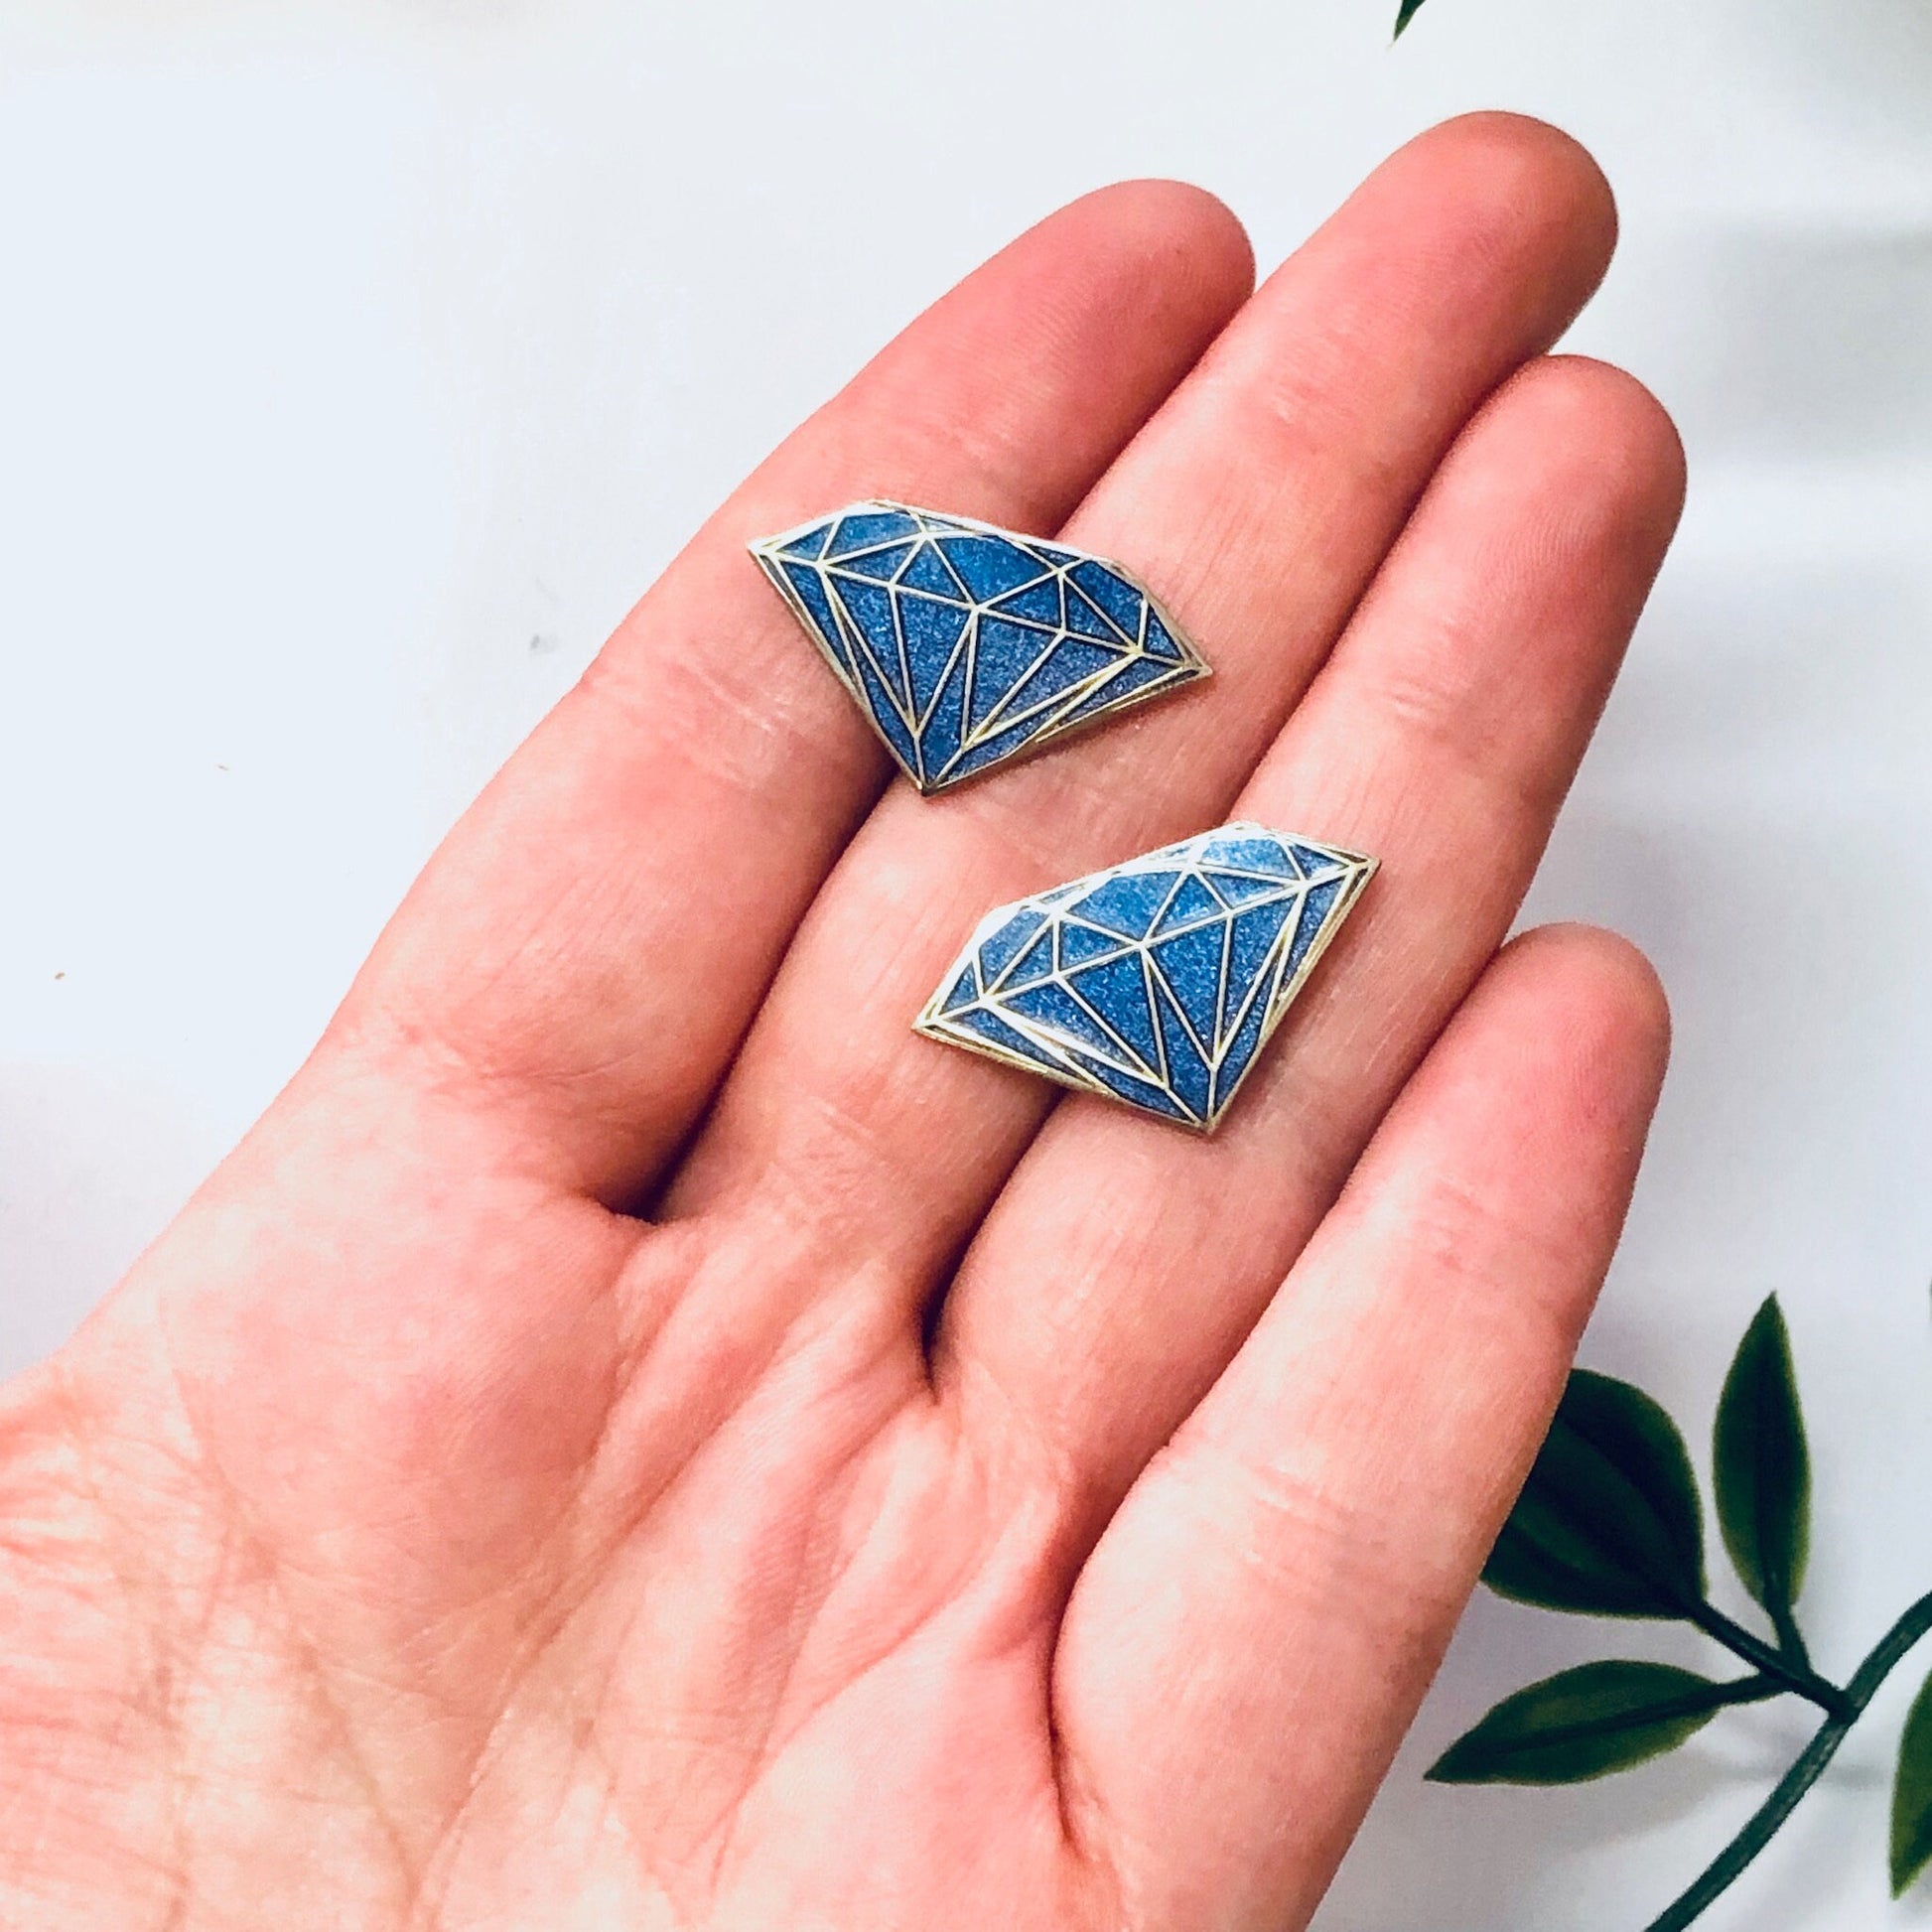 Two blue enamel diamond-shaped earrings held in a person's hand against a white background with leaves.